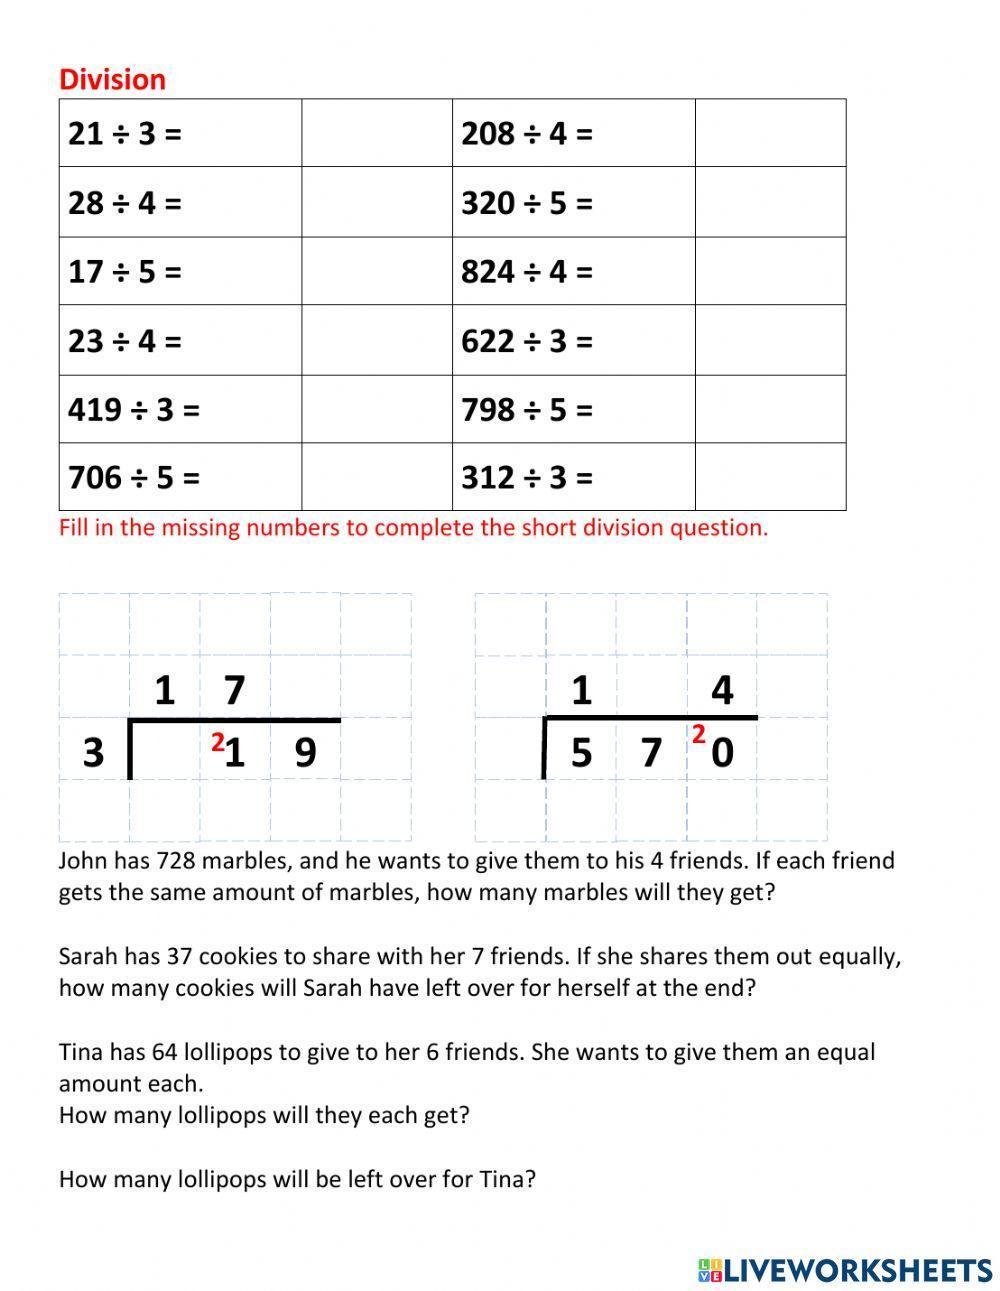 Multiplication and division practice